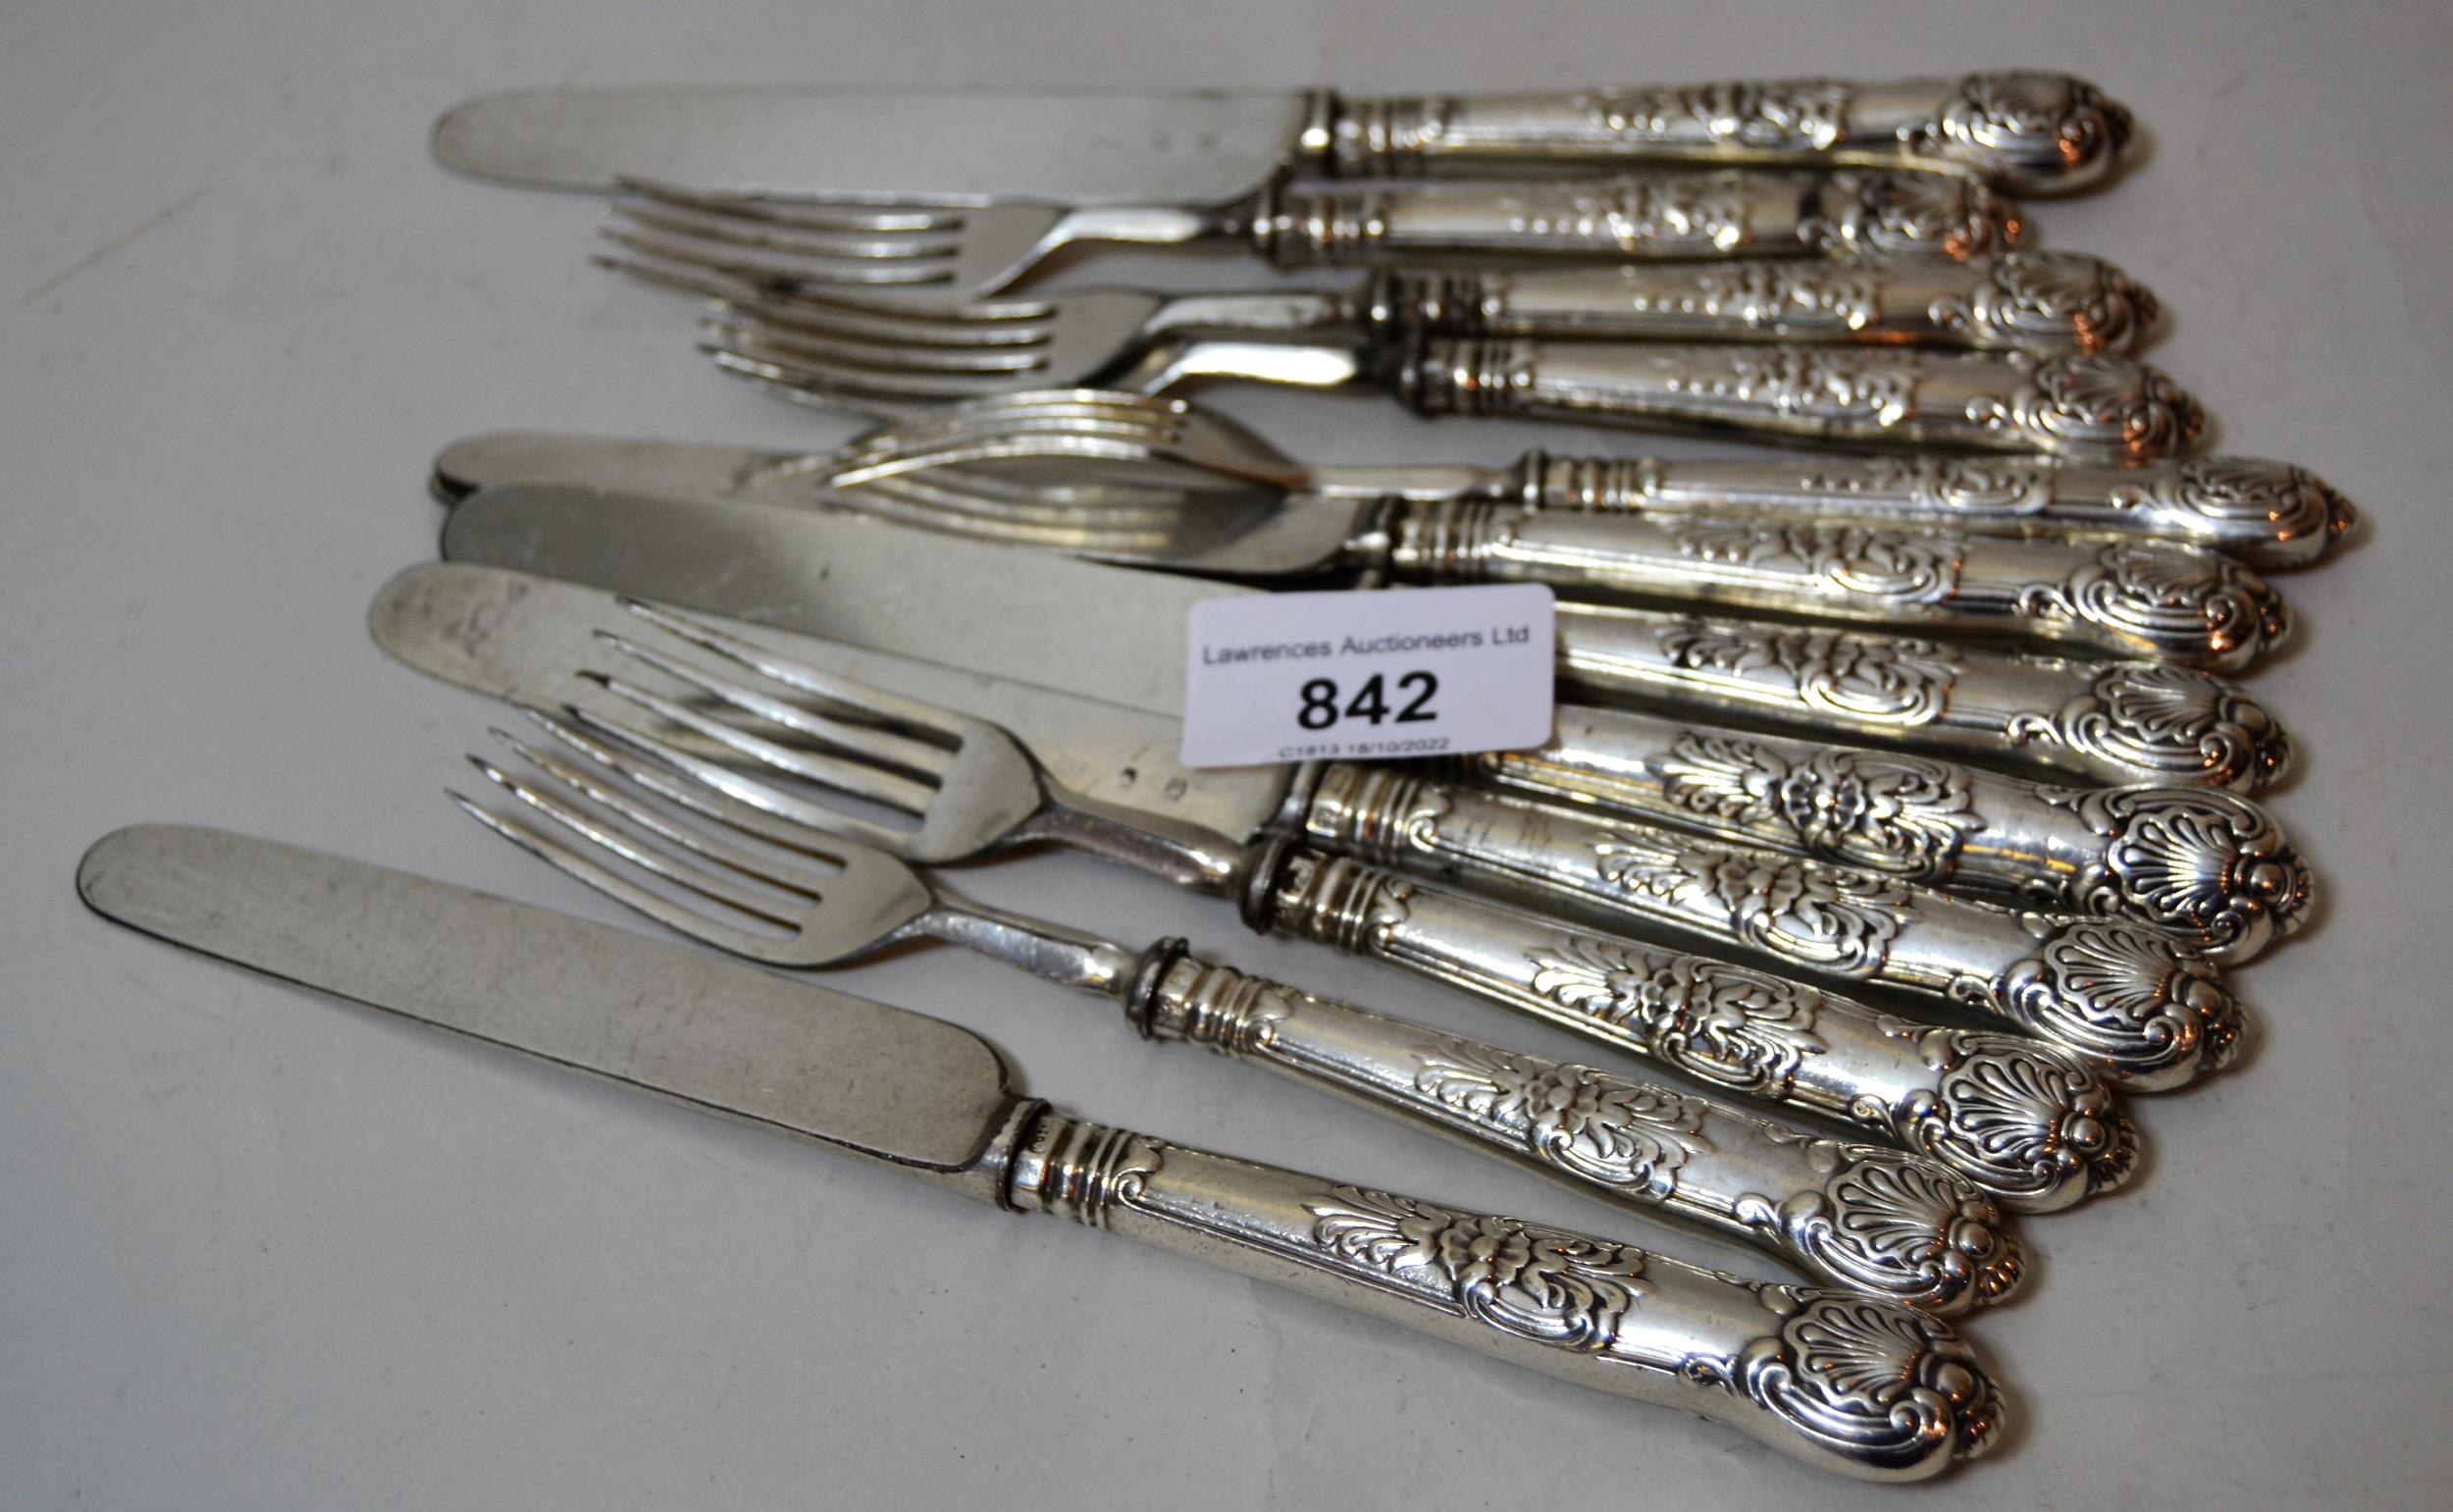 Set of six George III Queen's pattern silver handled dessert knives and forks Silver plating on